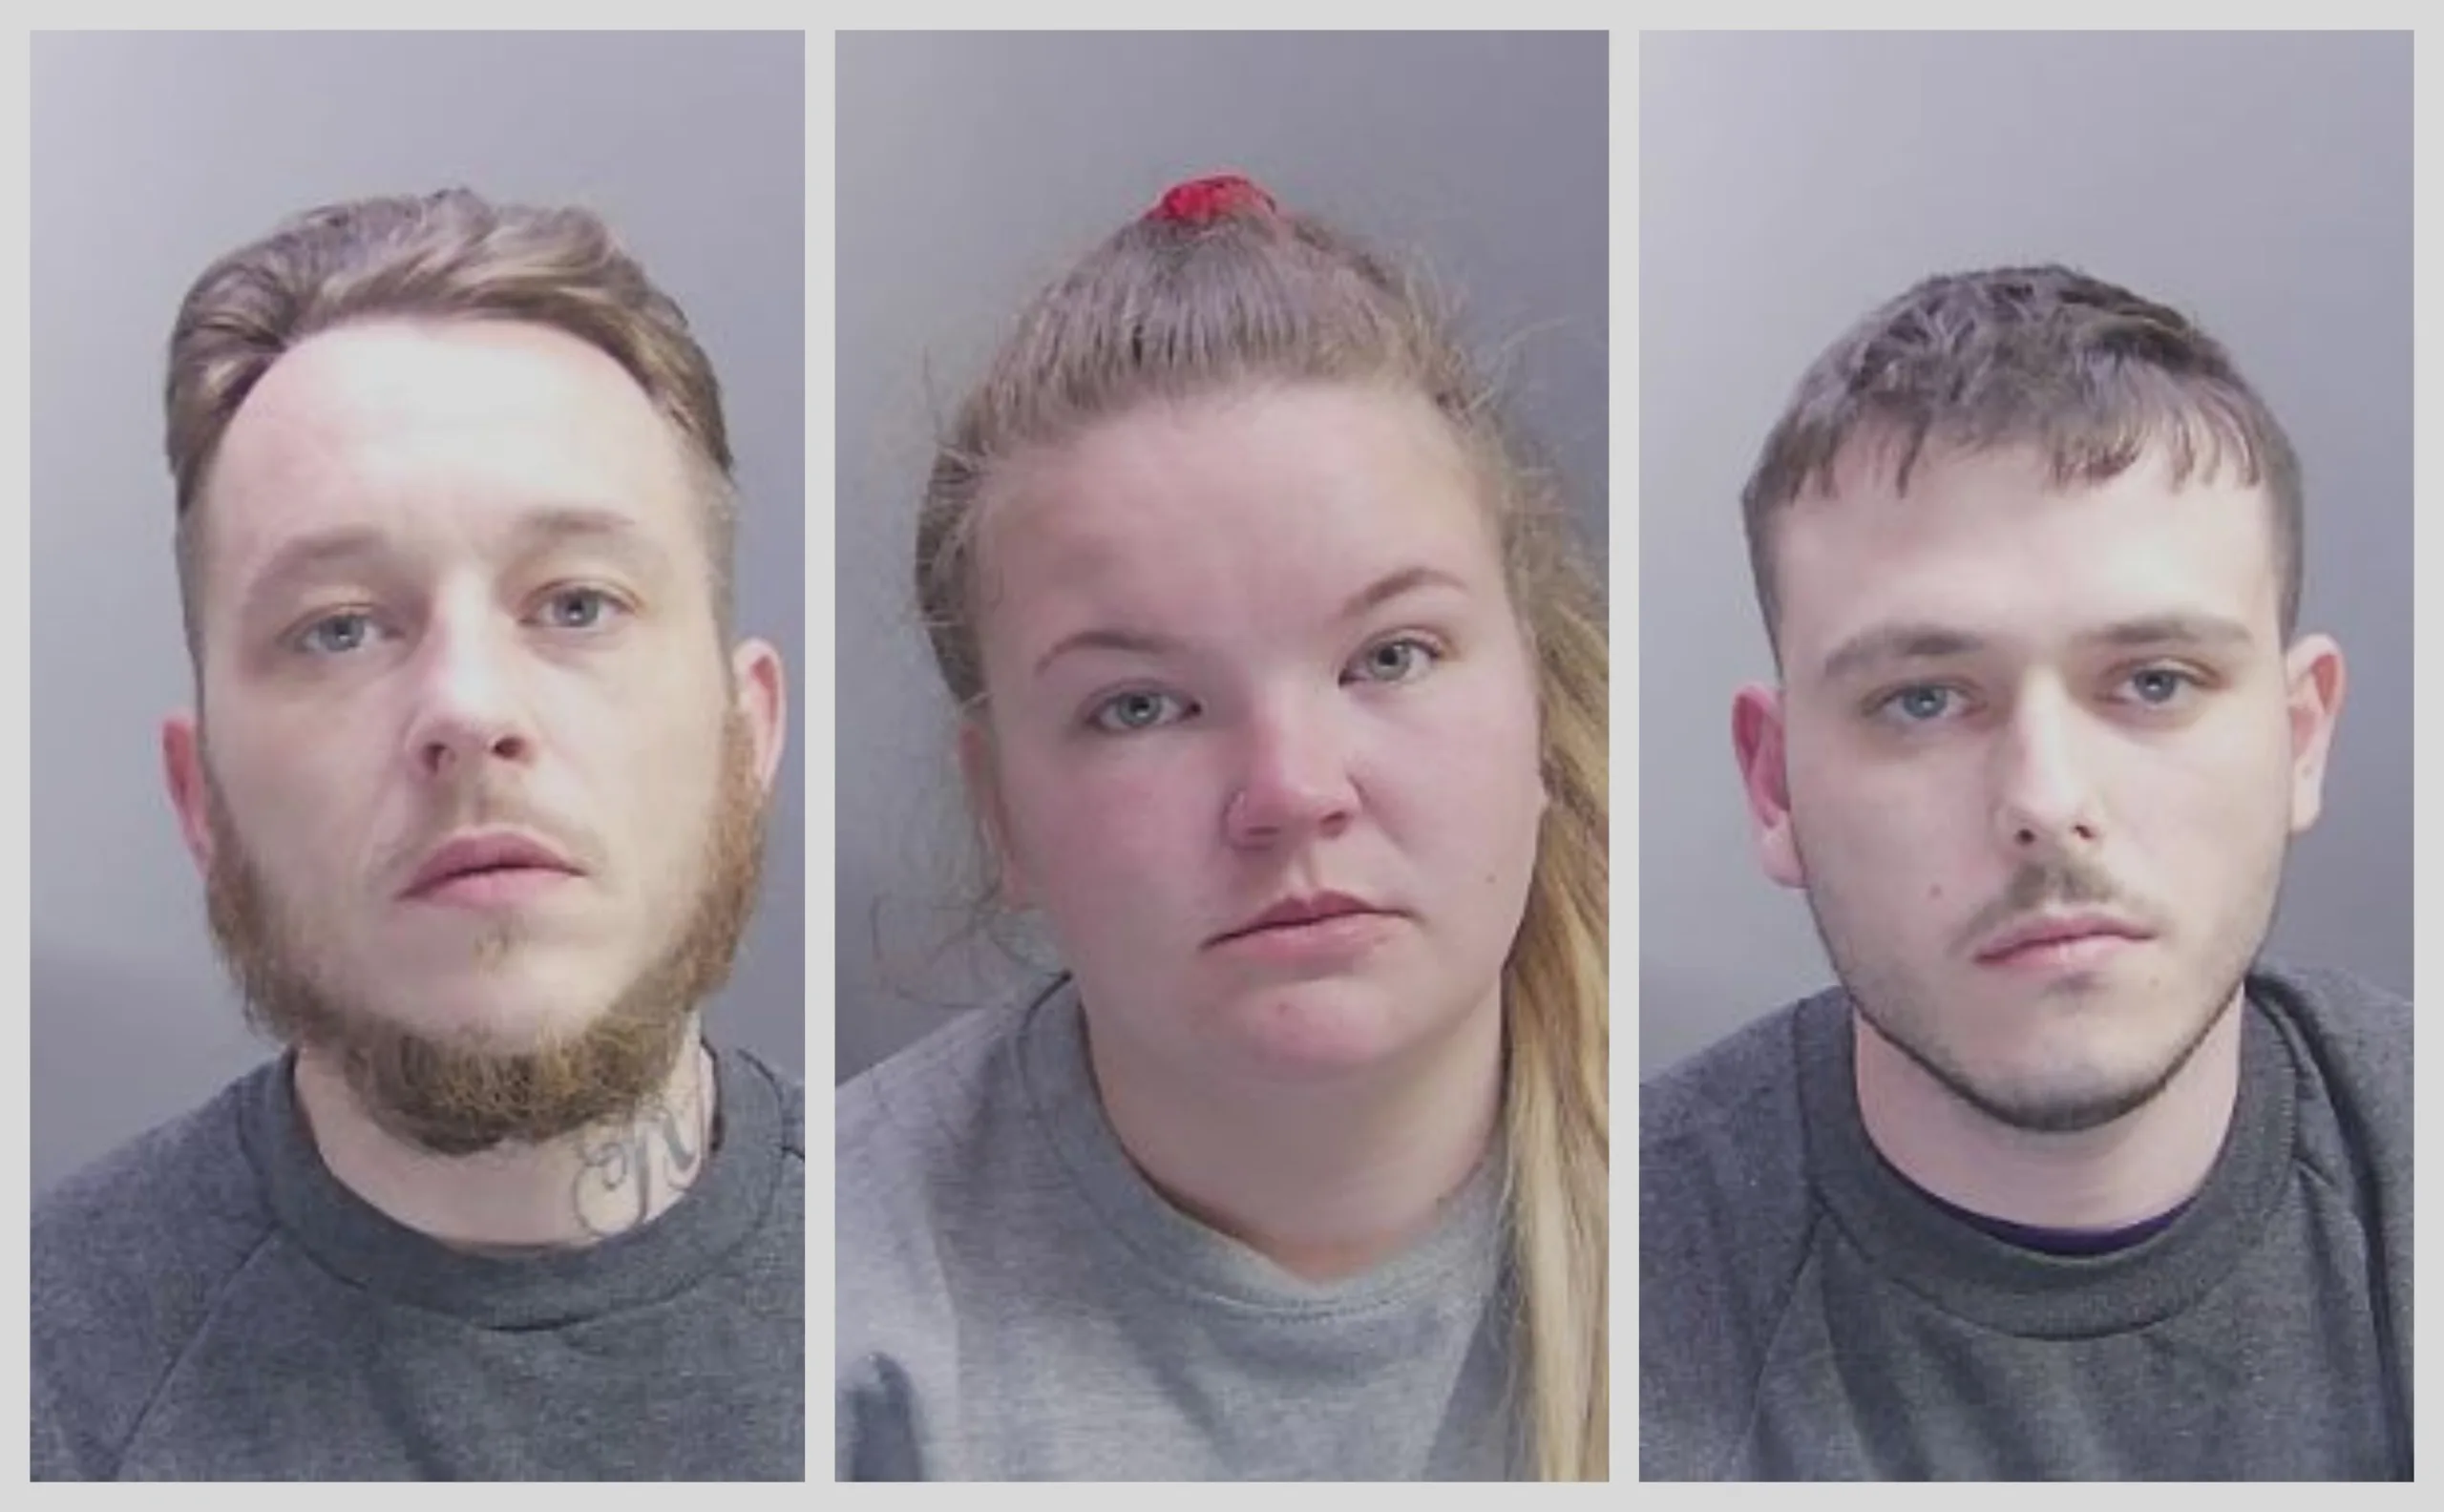 Ben Williams, 32, (left) used a claw hammer to repeatedly hit the victim and (centre) Tamara Matthews, guilty of GBH and (right) Leonard Davis, also guilty of GBH with intent.